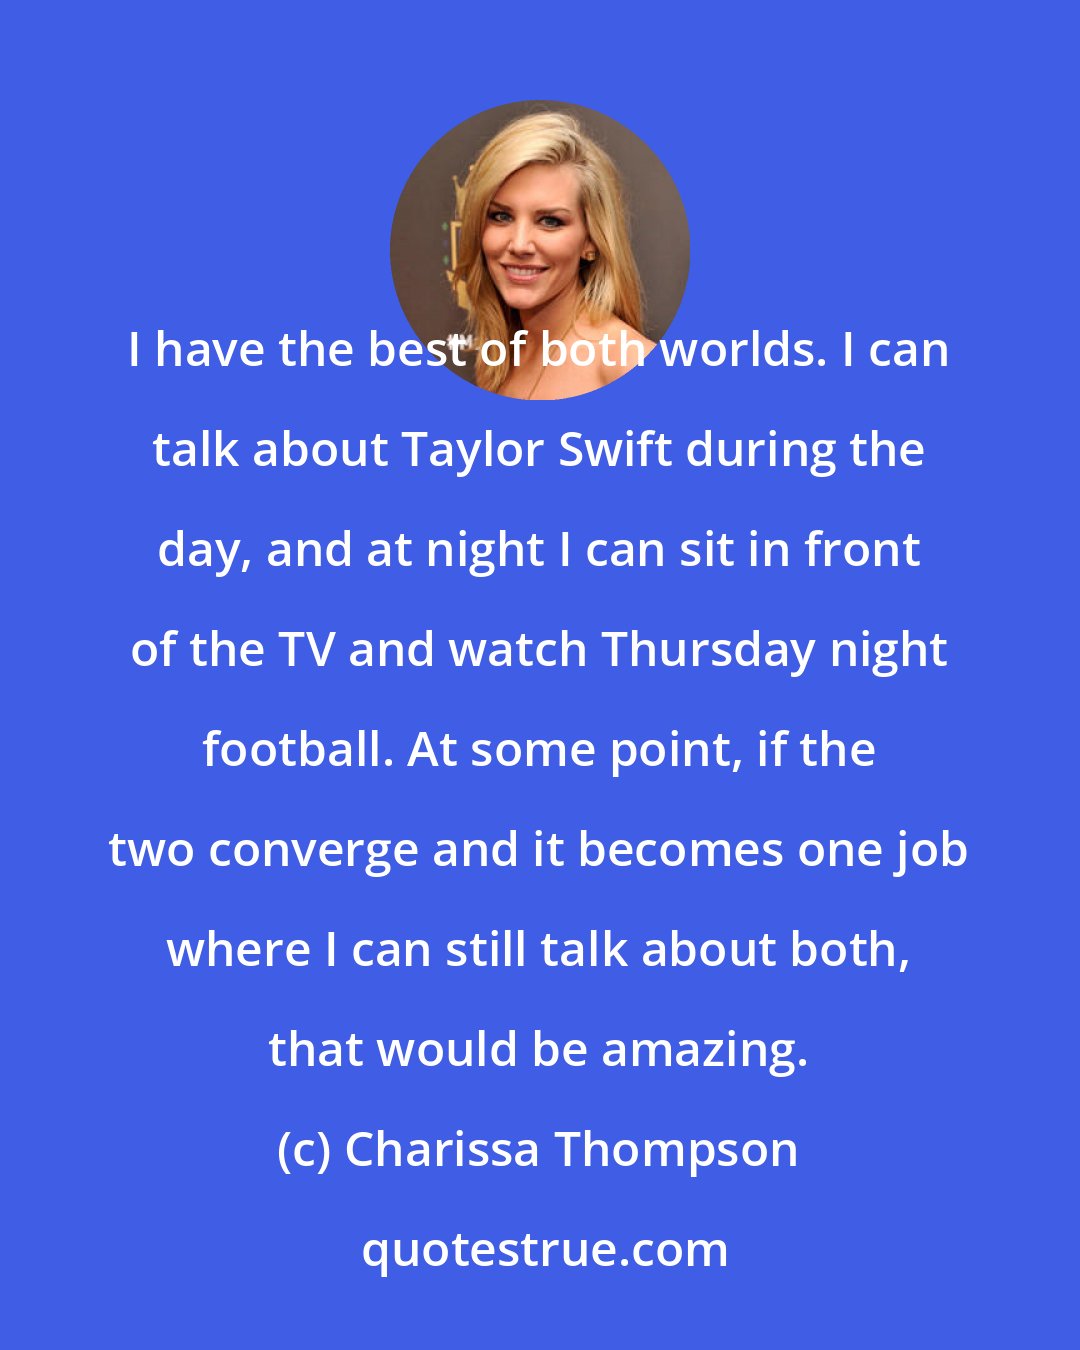 Charissa Thompson: I have the best of both worlds. I can talk about Taylor Swift during the day, and at night I can sit in front of the TV and watch Thursday night football. At some point, if the two converge and it becomes one job where I can still talk about both, that would be amazing.